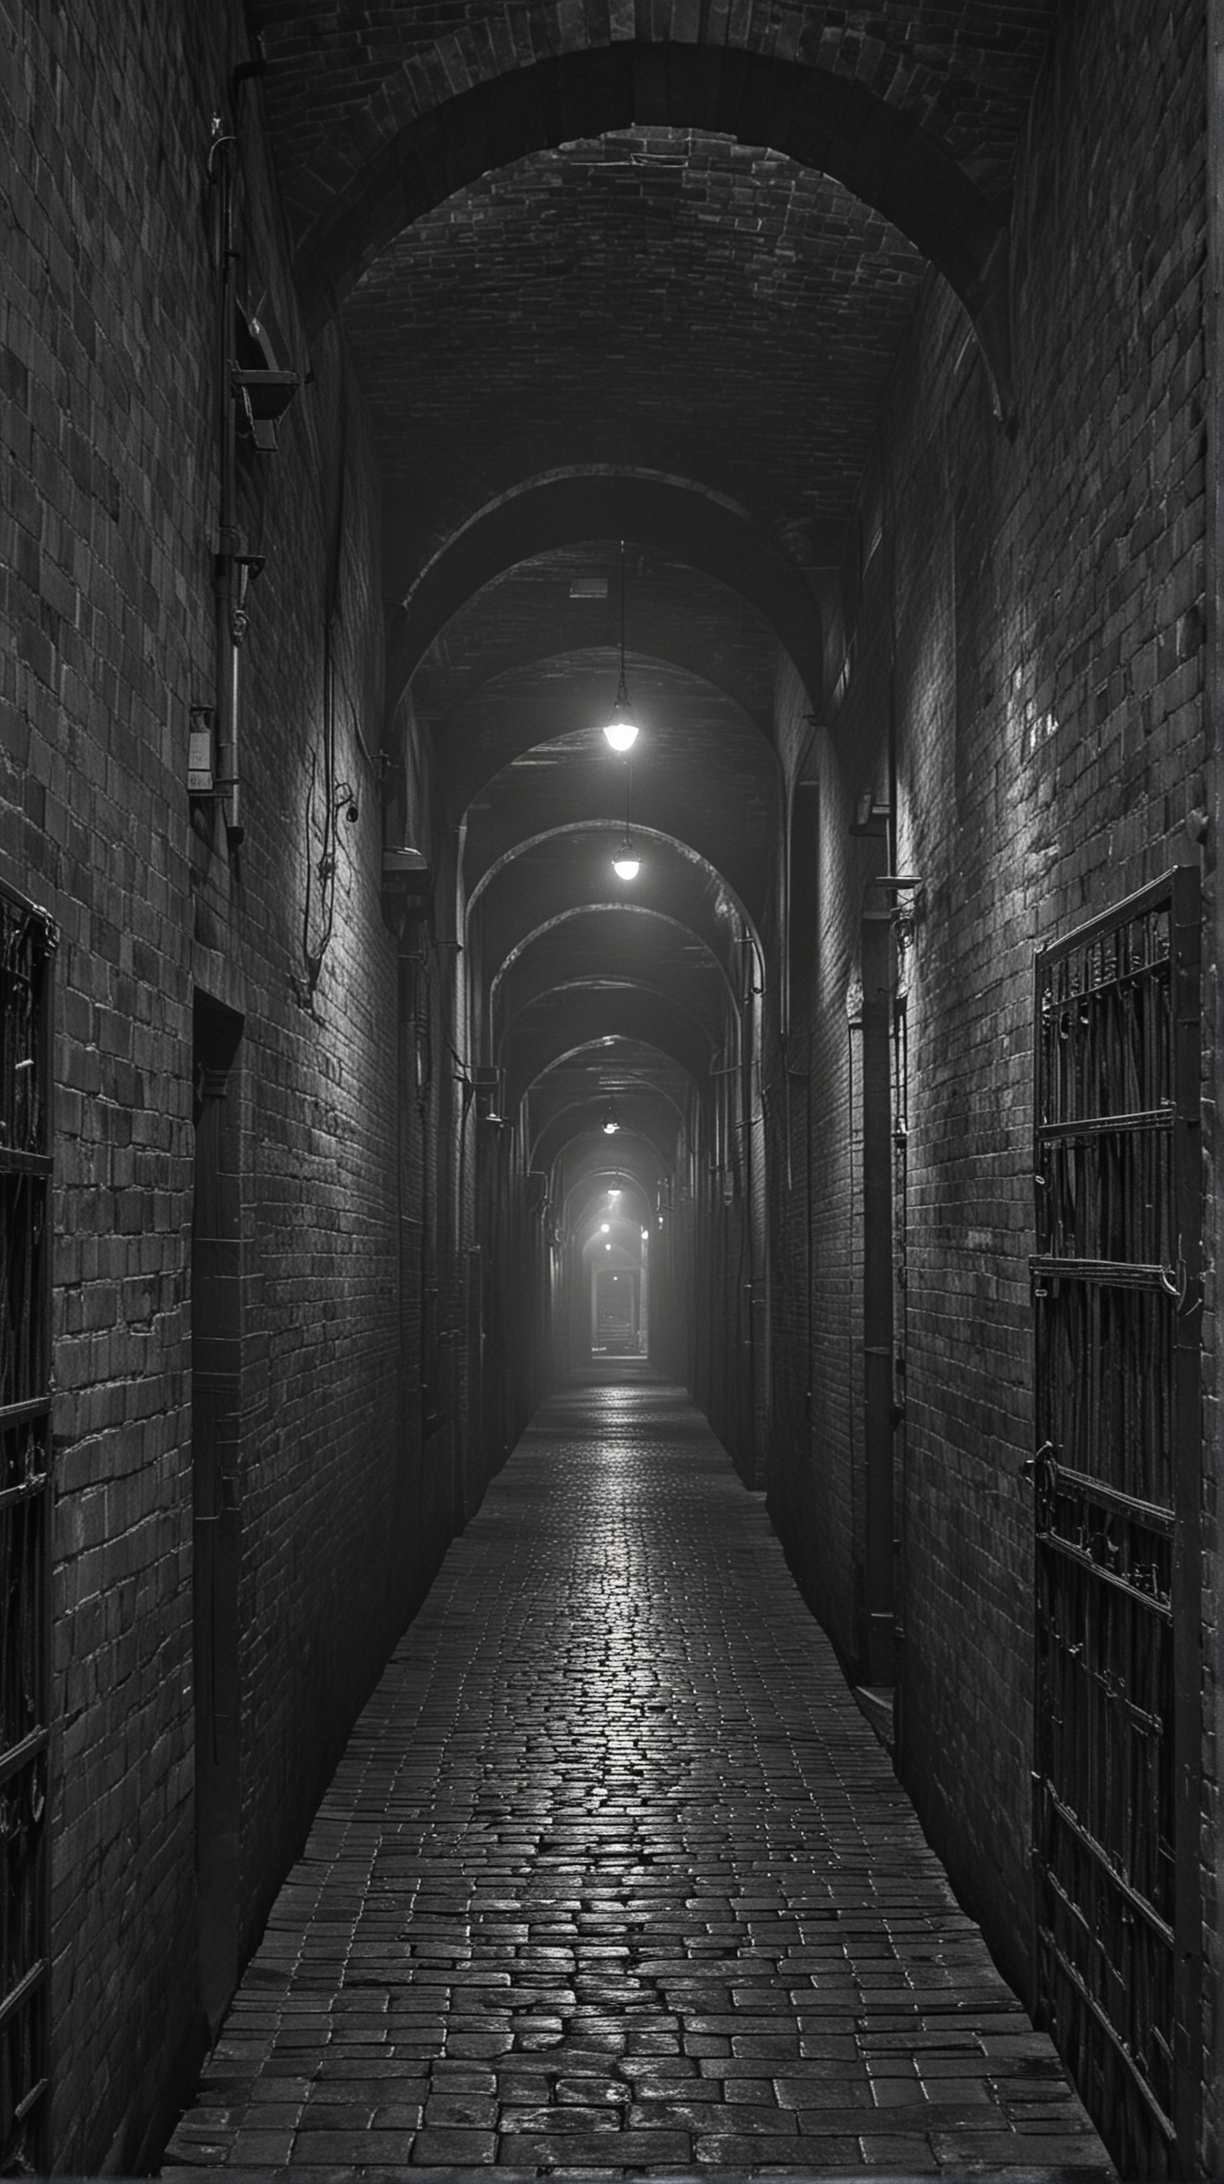 Mysterious Dark Alley Scene from Throne of Glass Series